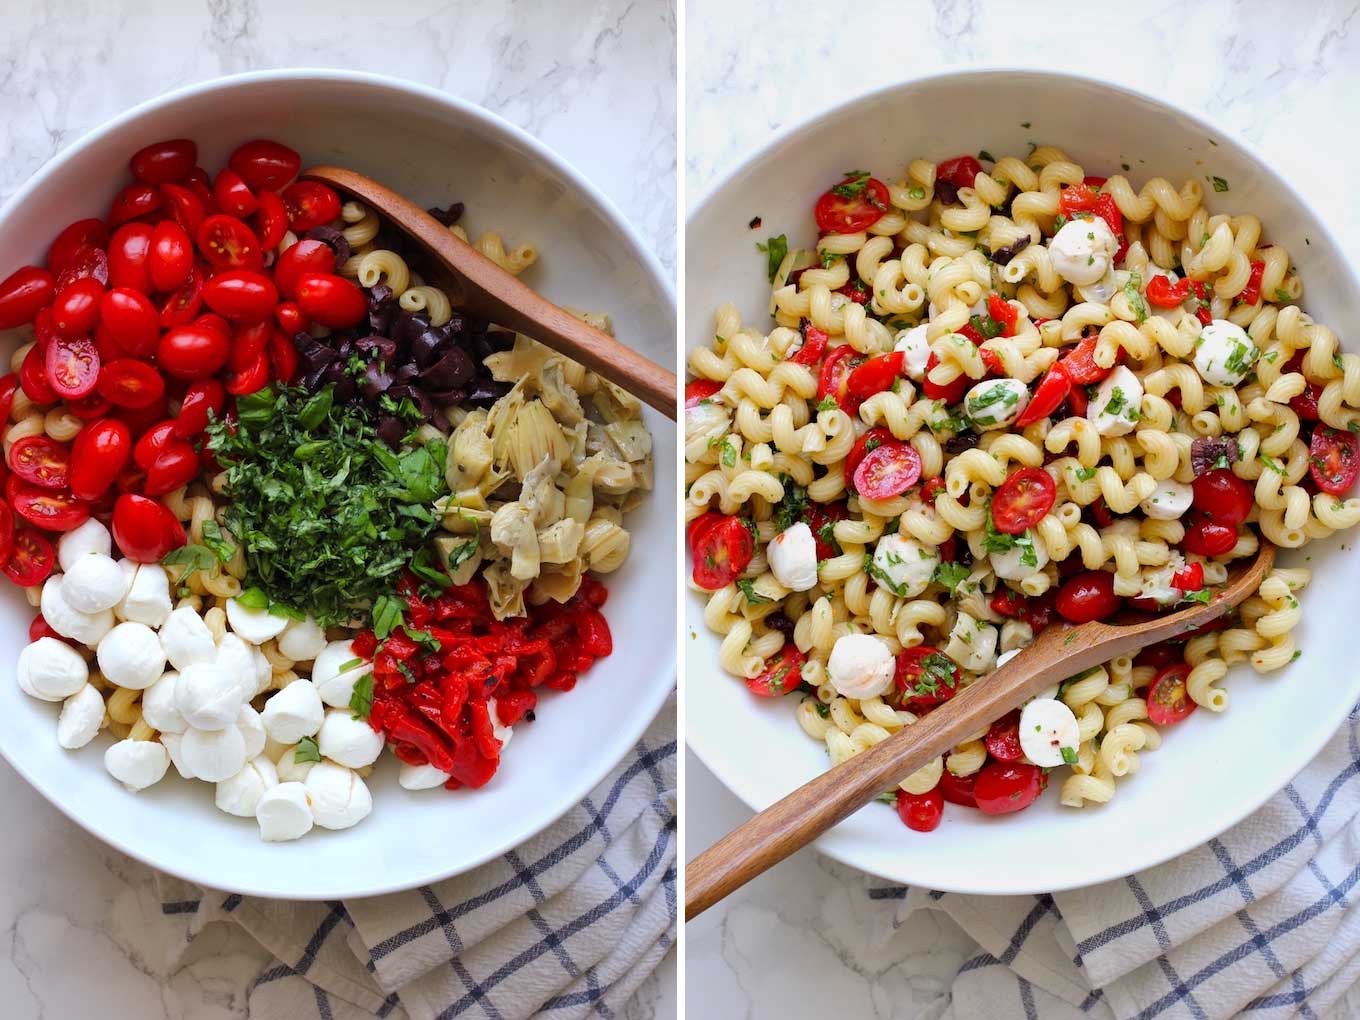 Side by side shot of pasta salad ingredients in a large white bowl and then salad ingredients tossed with a wooden spoon.